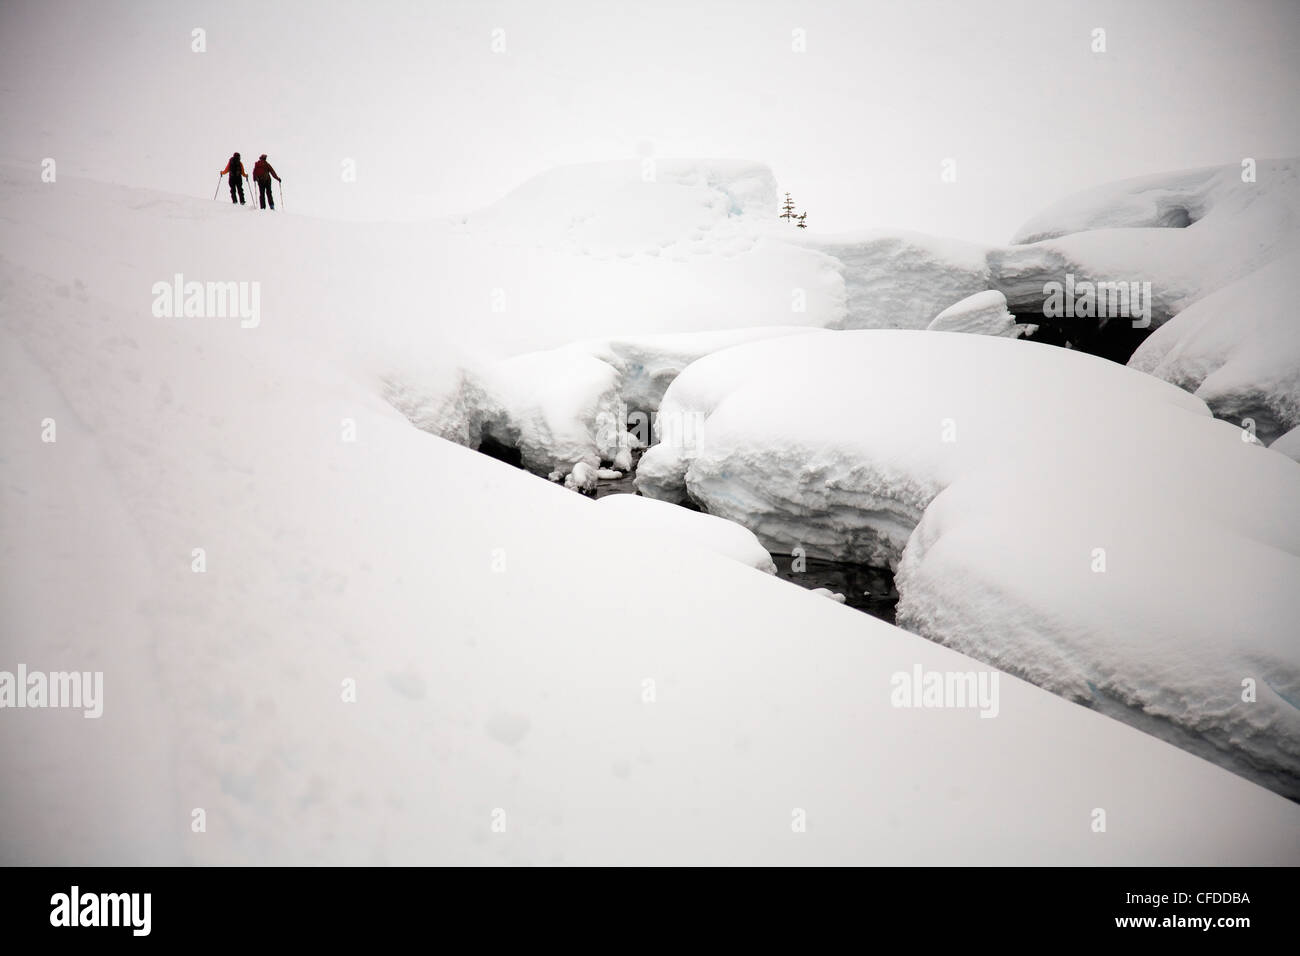 Two female backcountry skiers skin up into the mountains near Mount Baker. Stock Photo